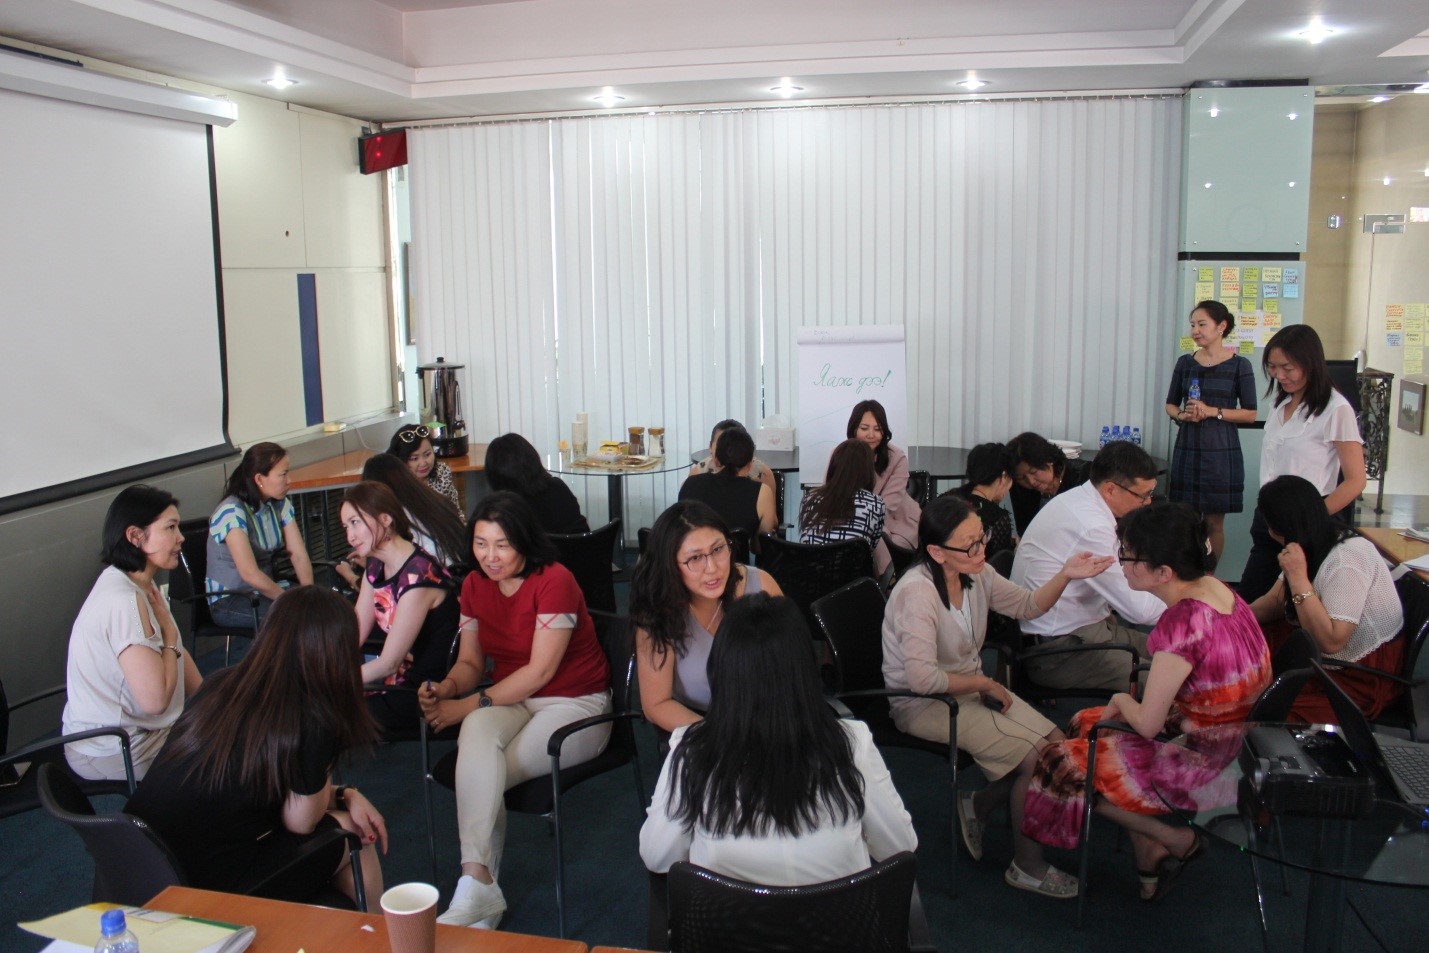 Reaching across the aisle: Women from opposing political parties sit together to discuss common challenges and ways to improve inclusiveness of political process in Mongolia in June 2018. Photo: BRIDGE workshop.